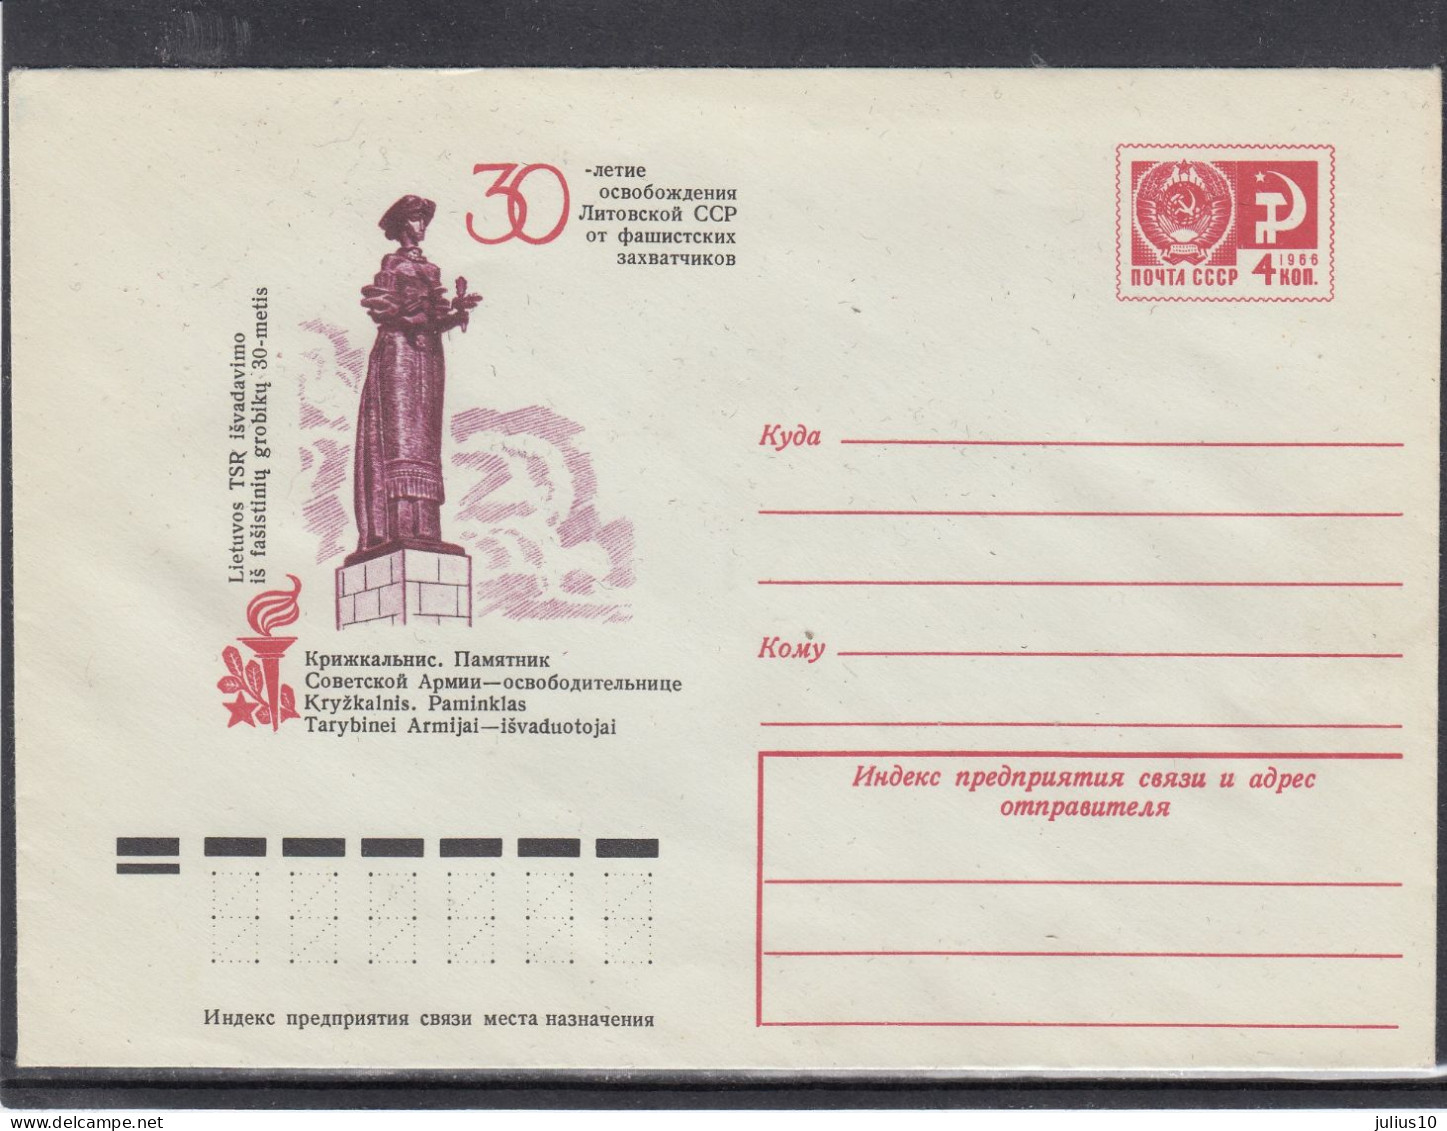 LITHUANIA (USSR) 1974 Cover Kryzkalnis WWII Monument #LTV96 - Lithuania